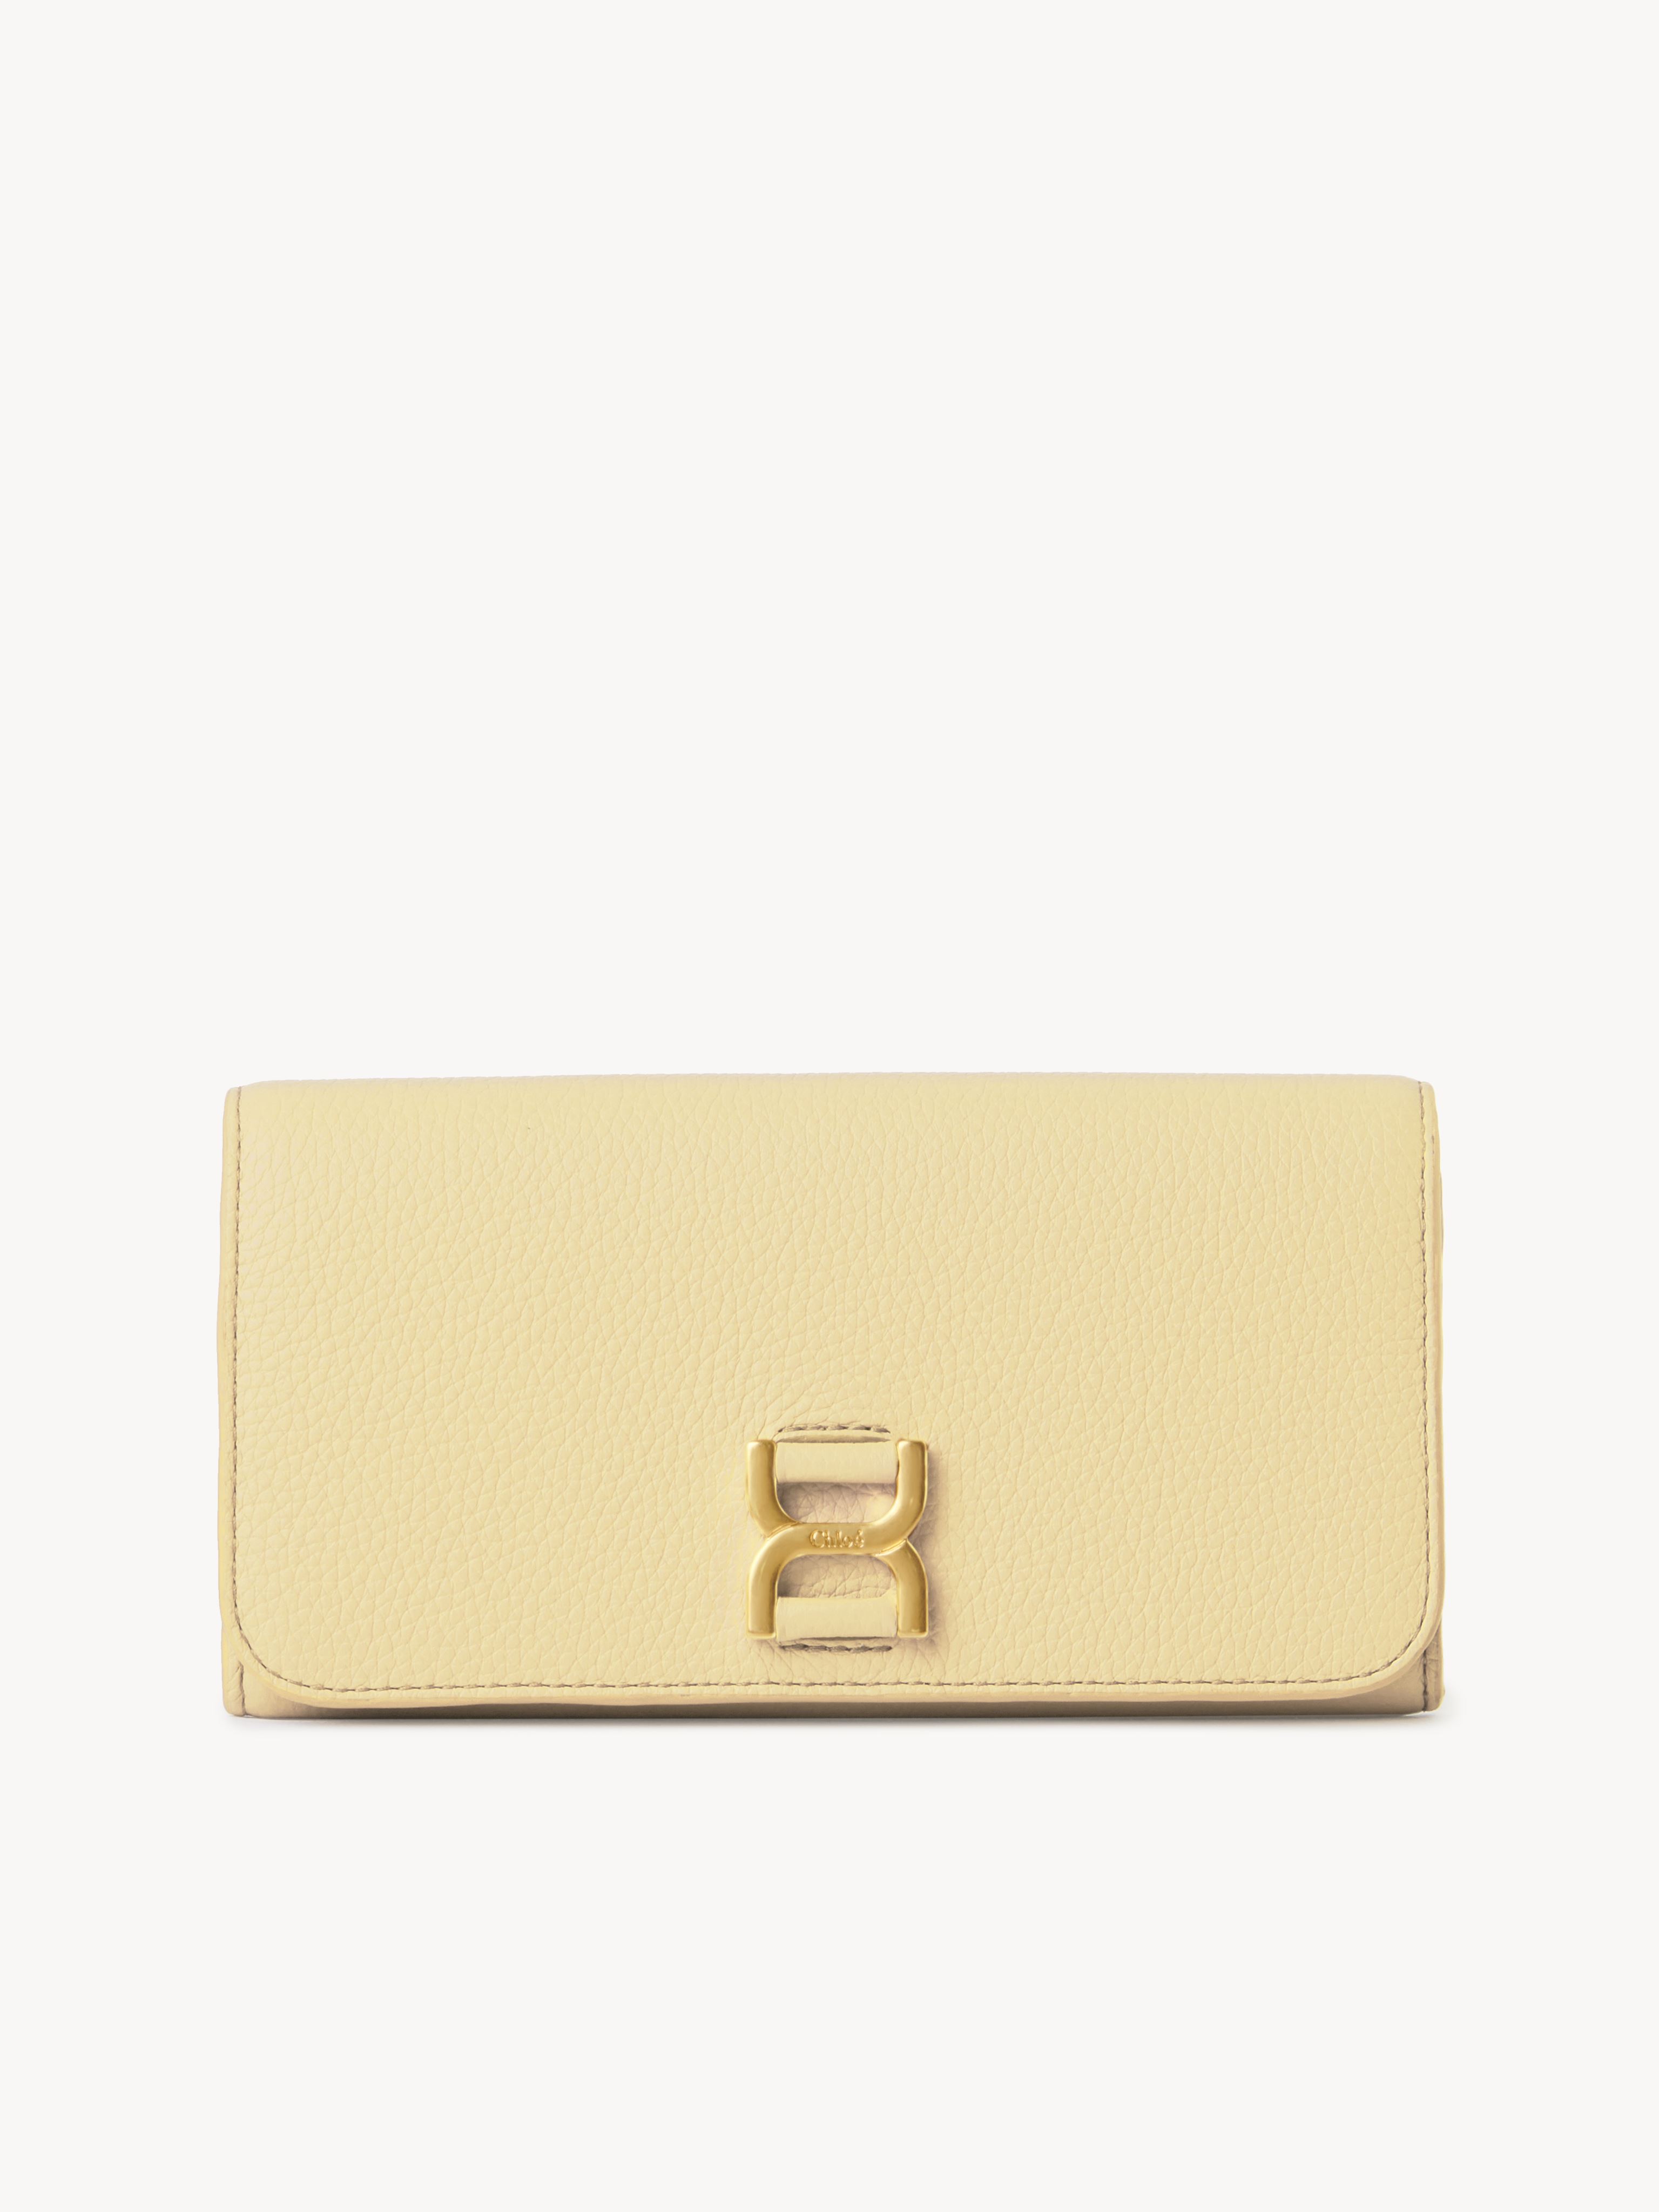 Chloé Marcie Long Wallet With Flap Gold Size Onesize 100% Calf-skin Leather